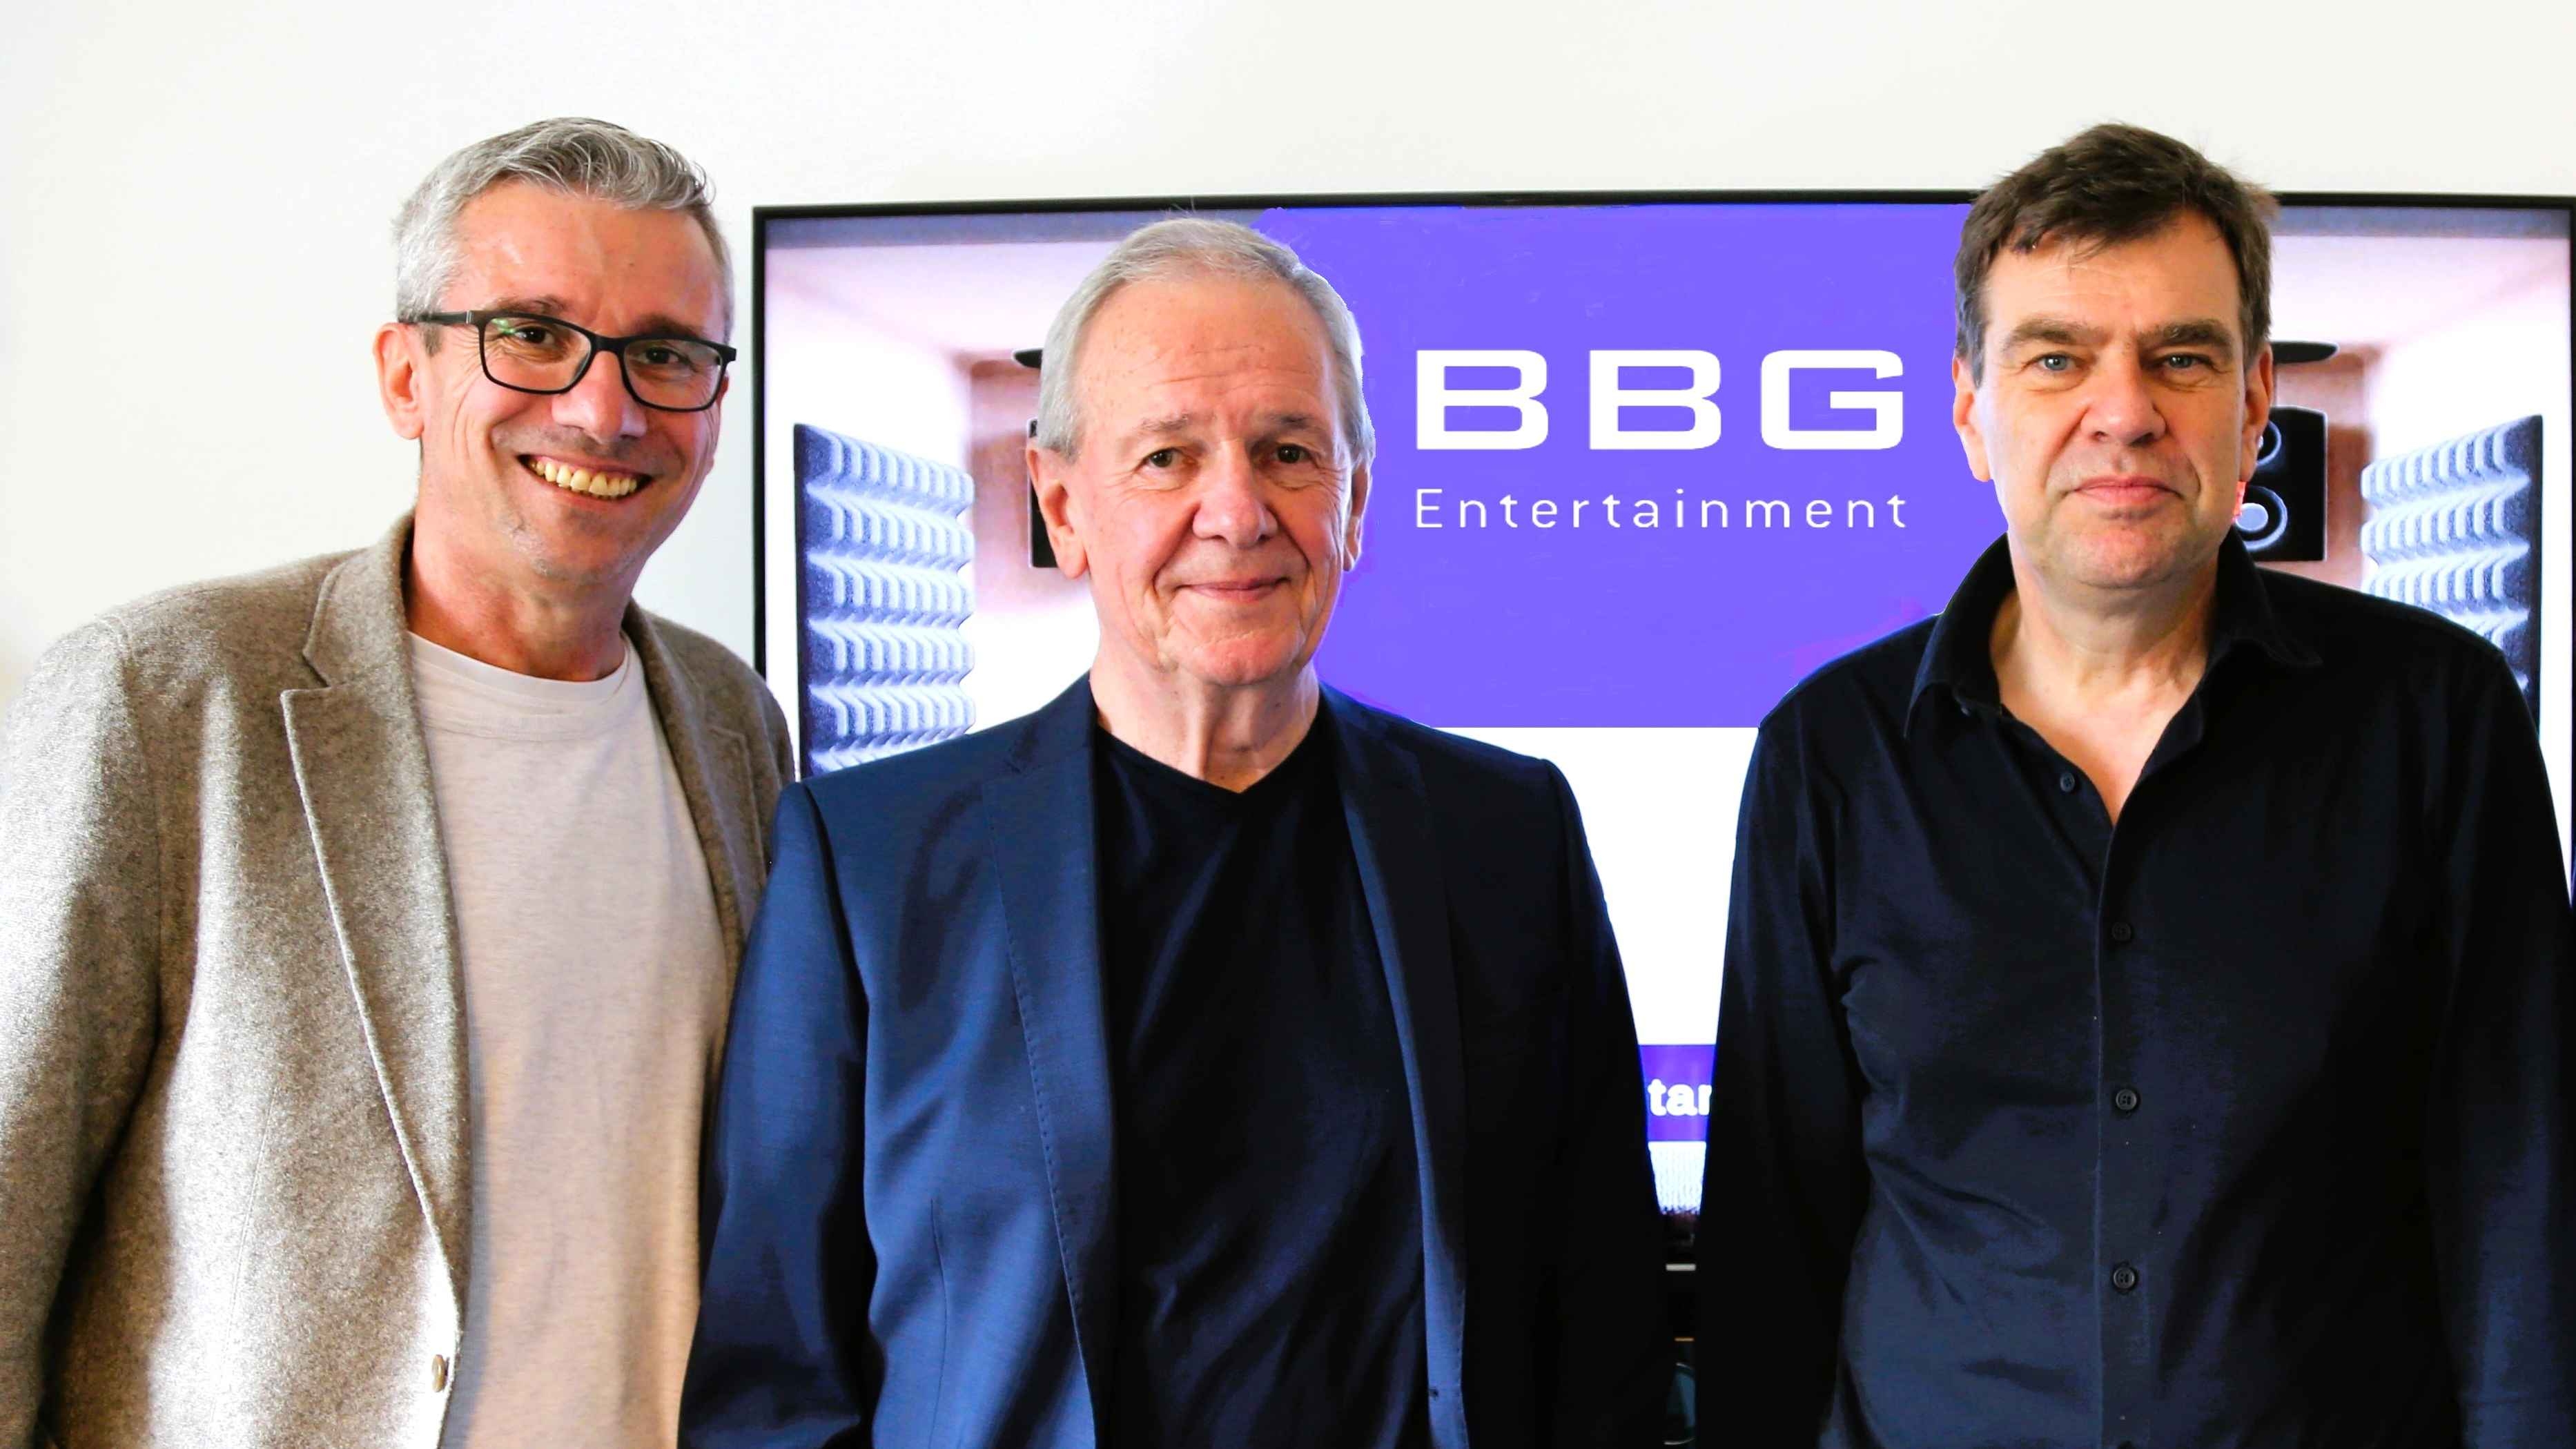 BBG Entertainment hires Hans Ippisch and Fritz Egner Along With new Licences